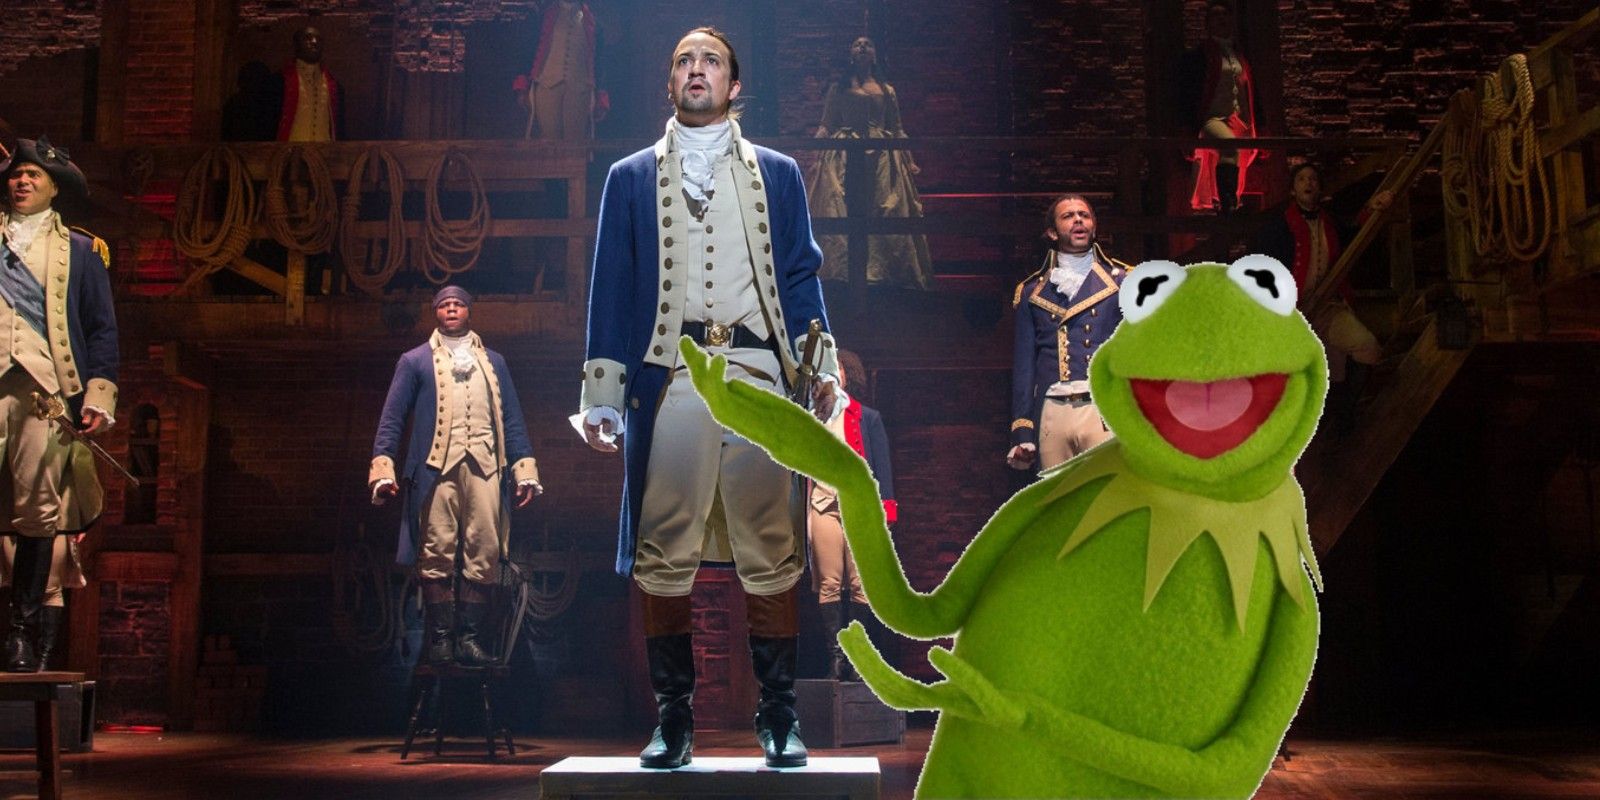 Every Hamilton Song Recreated With Muppets Is A Genius Parody